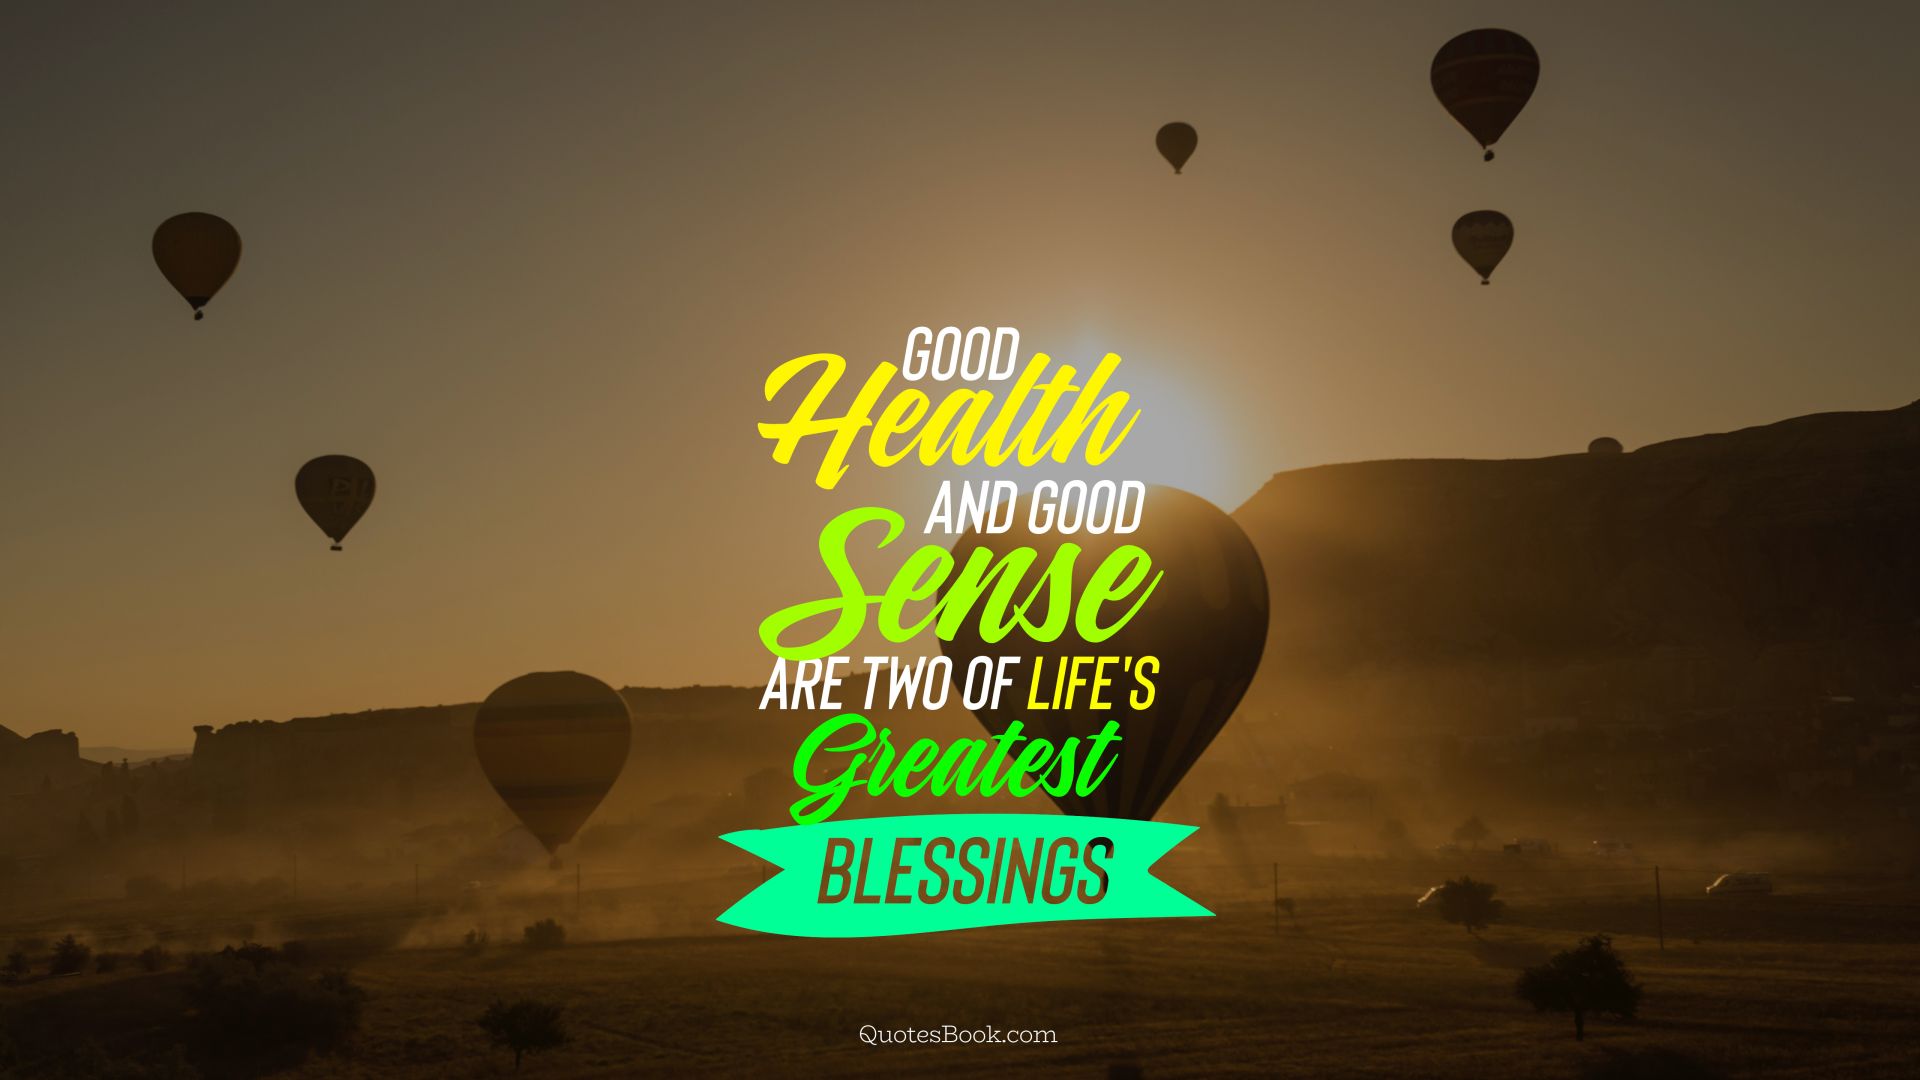 Good health and good sense are two of life's greatest blessings